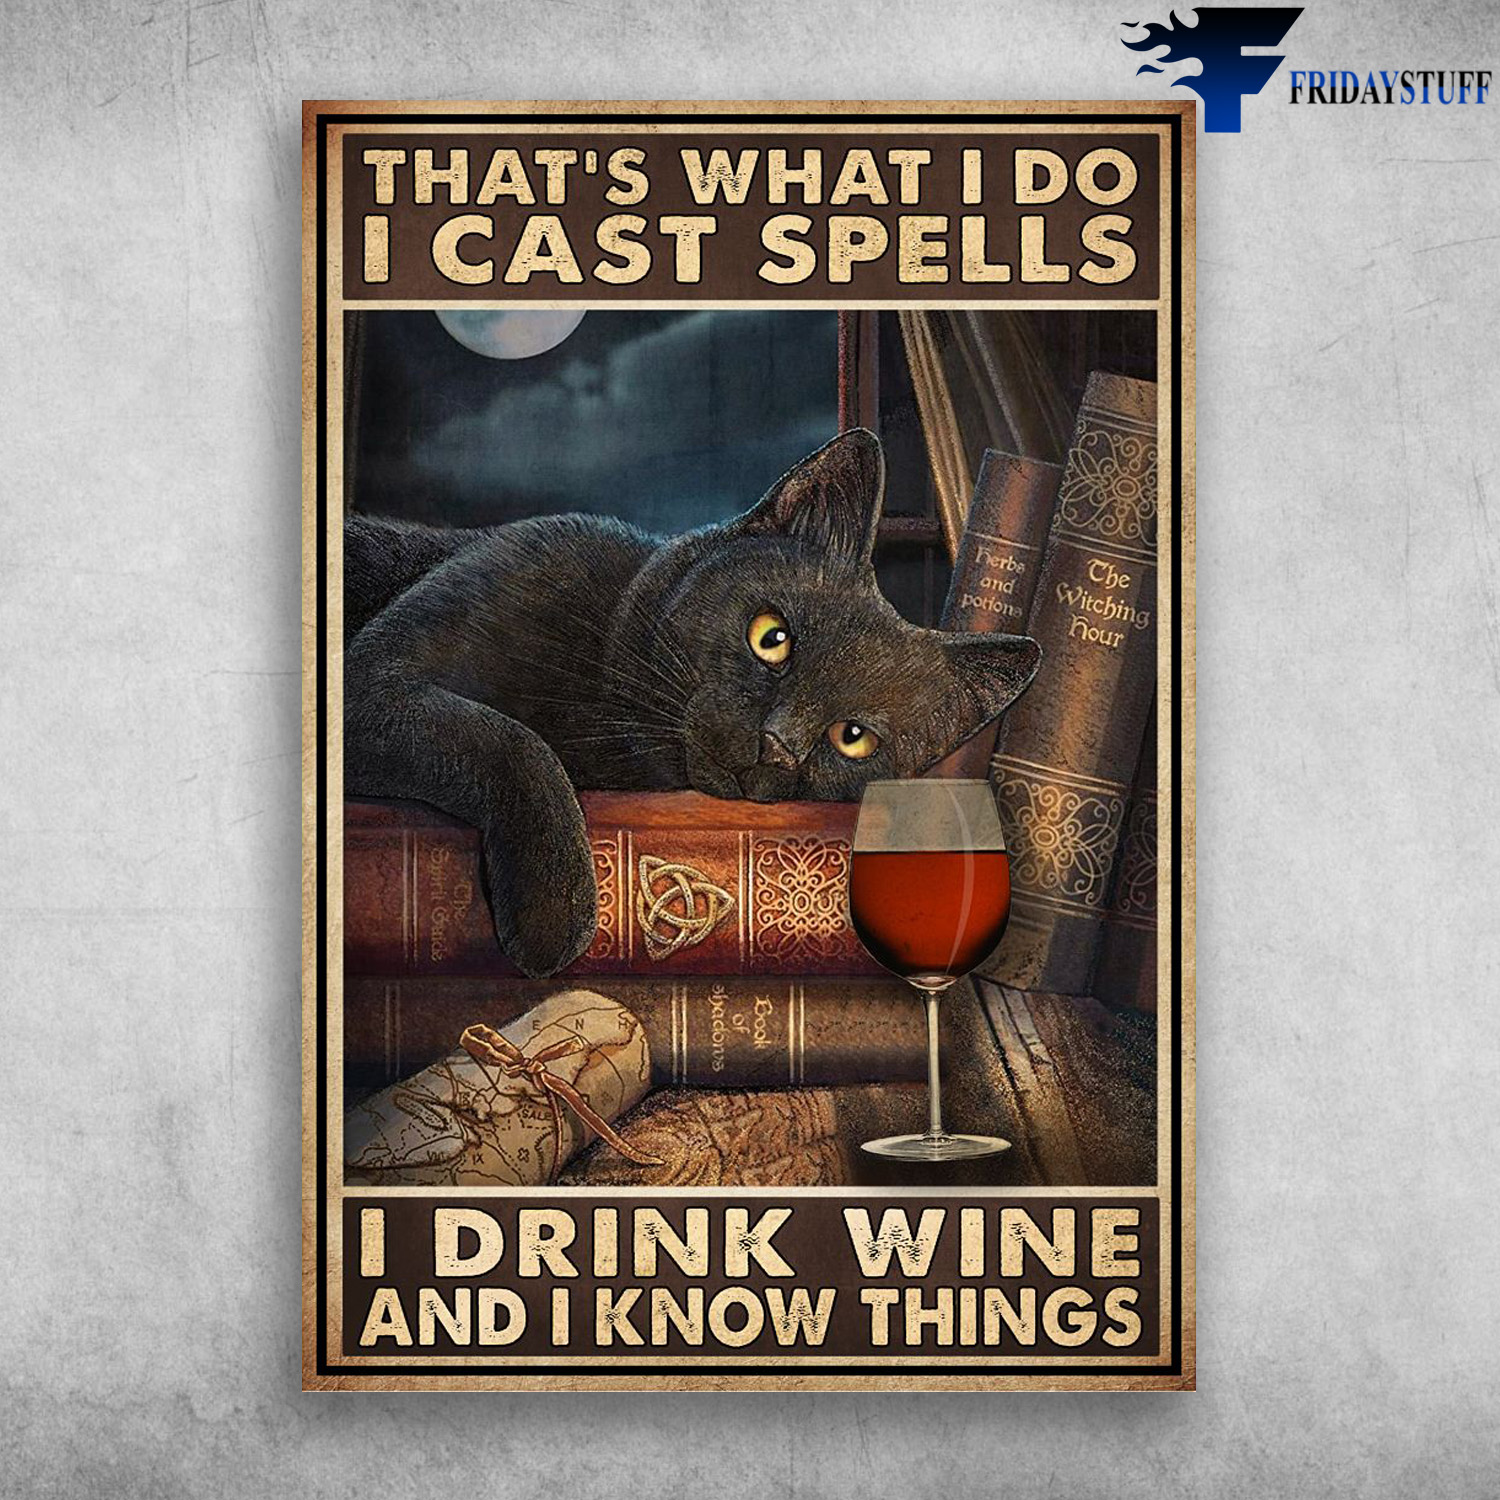 Black Cat, Wine And Book - That's What I Do, I Cast Spells, I Drink Wine, And I Know Things